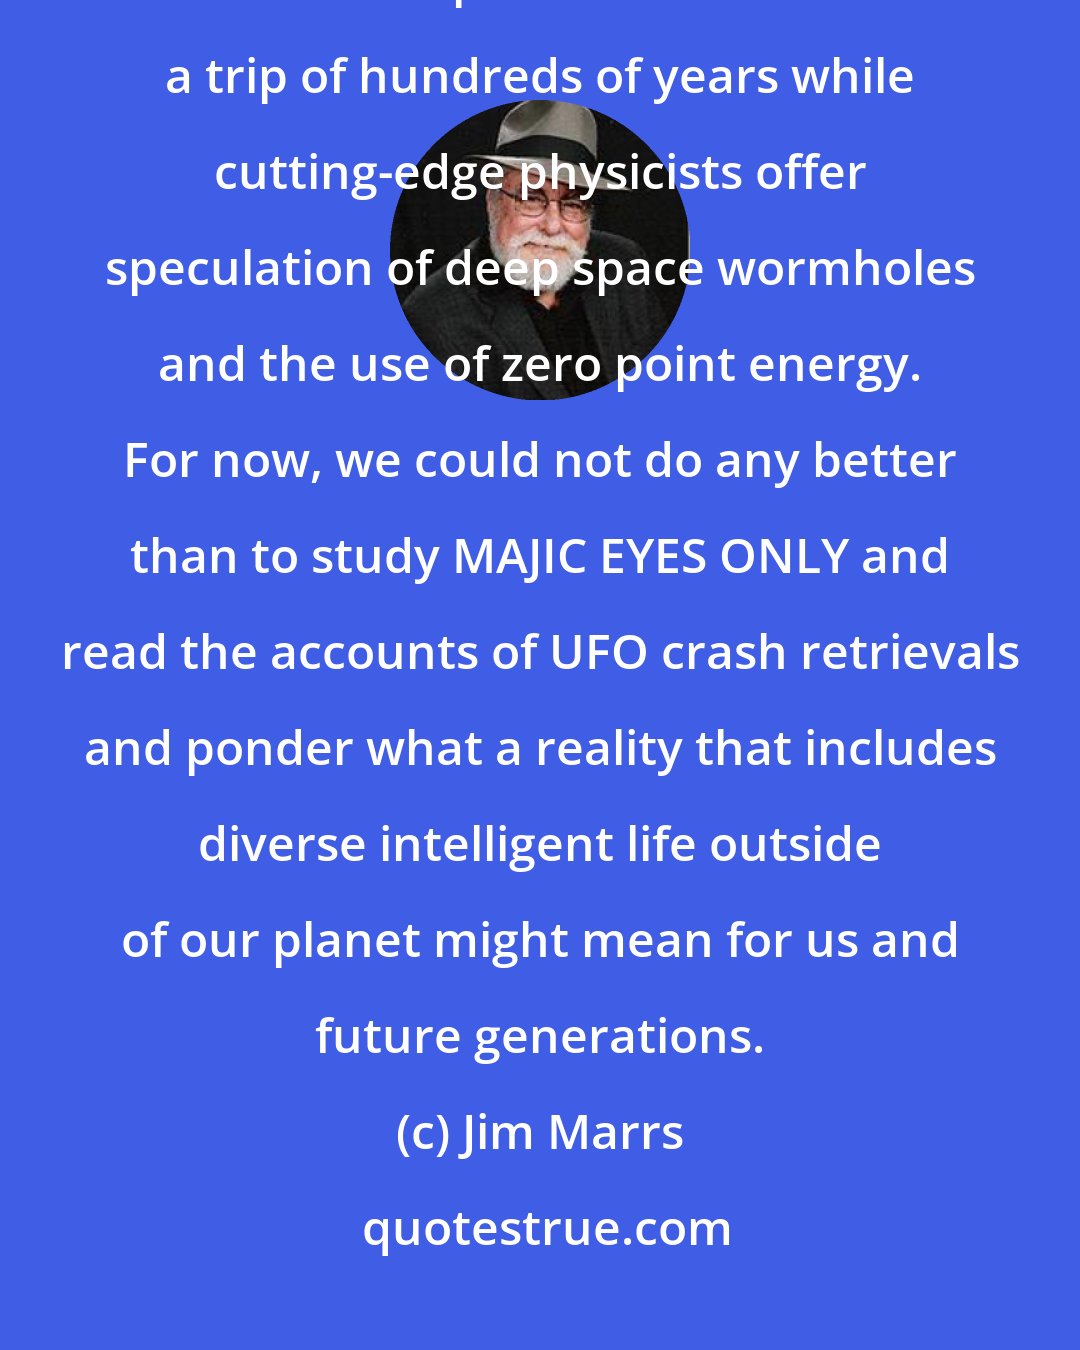 Jim Marrs: Many questions remain in the UFO controversy. Scientists ask how interstellar pilots could survive a trip of hundreds of years while cutting-edge physicists offer speculation of deep space wormholes and the use of zero point energy. For now, we could not do any better than to study MAJIC EYES ONLY and read the accounts of UFO crash retrievals and ponder what a reality that includes diverse intelligent life outside of our planet might mean for us and future generations.